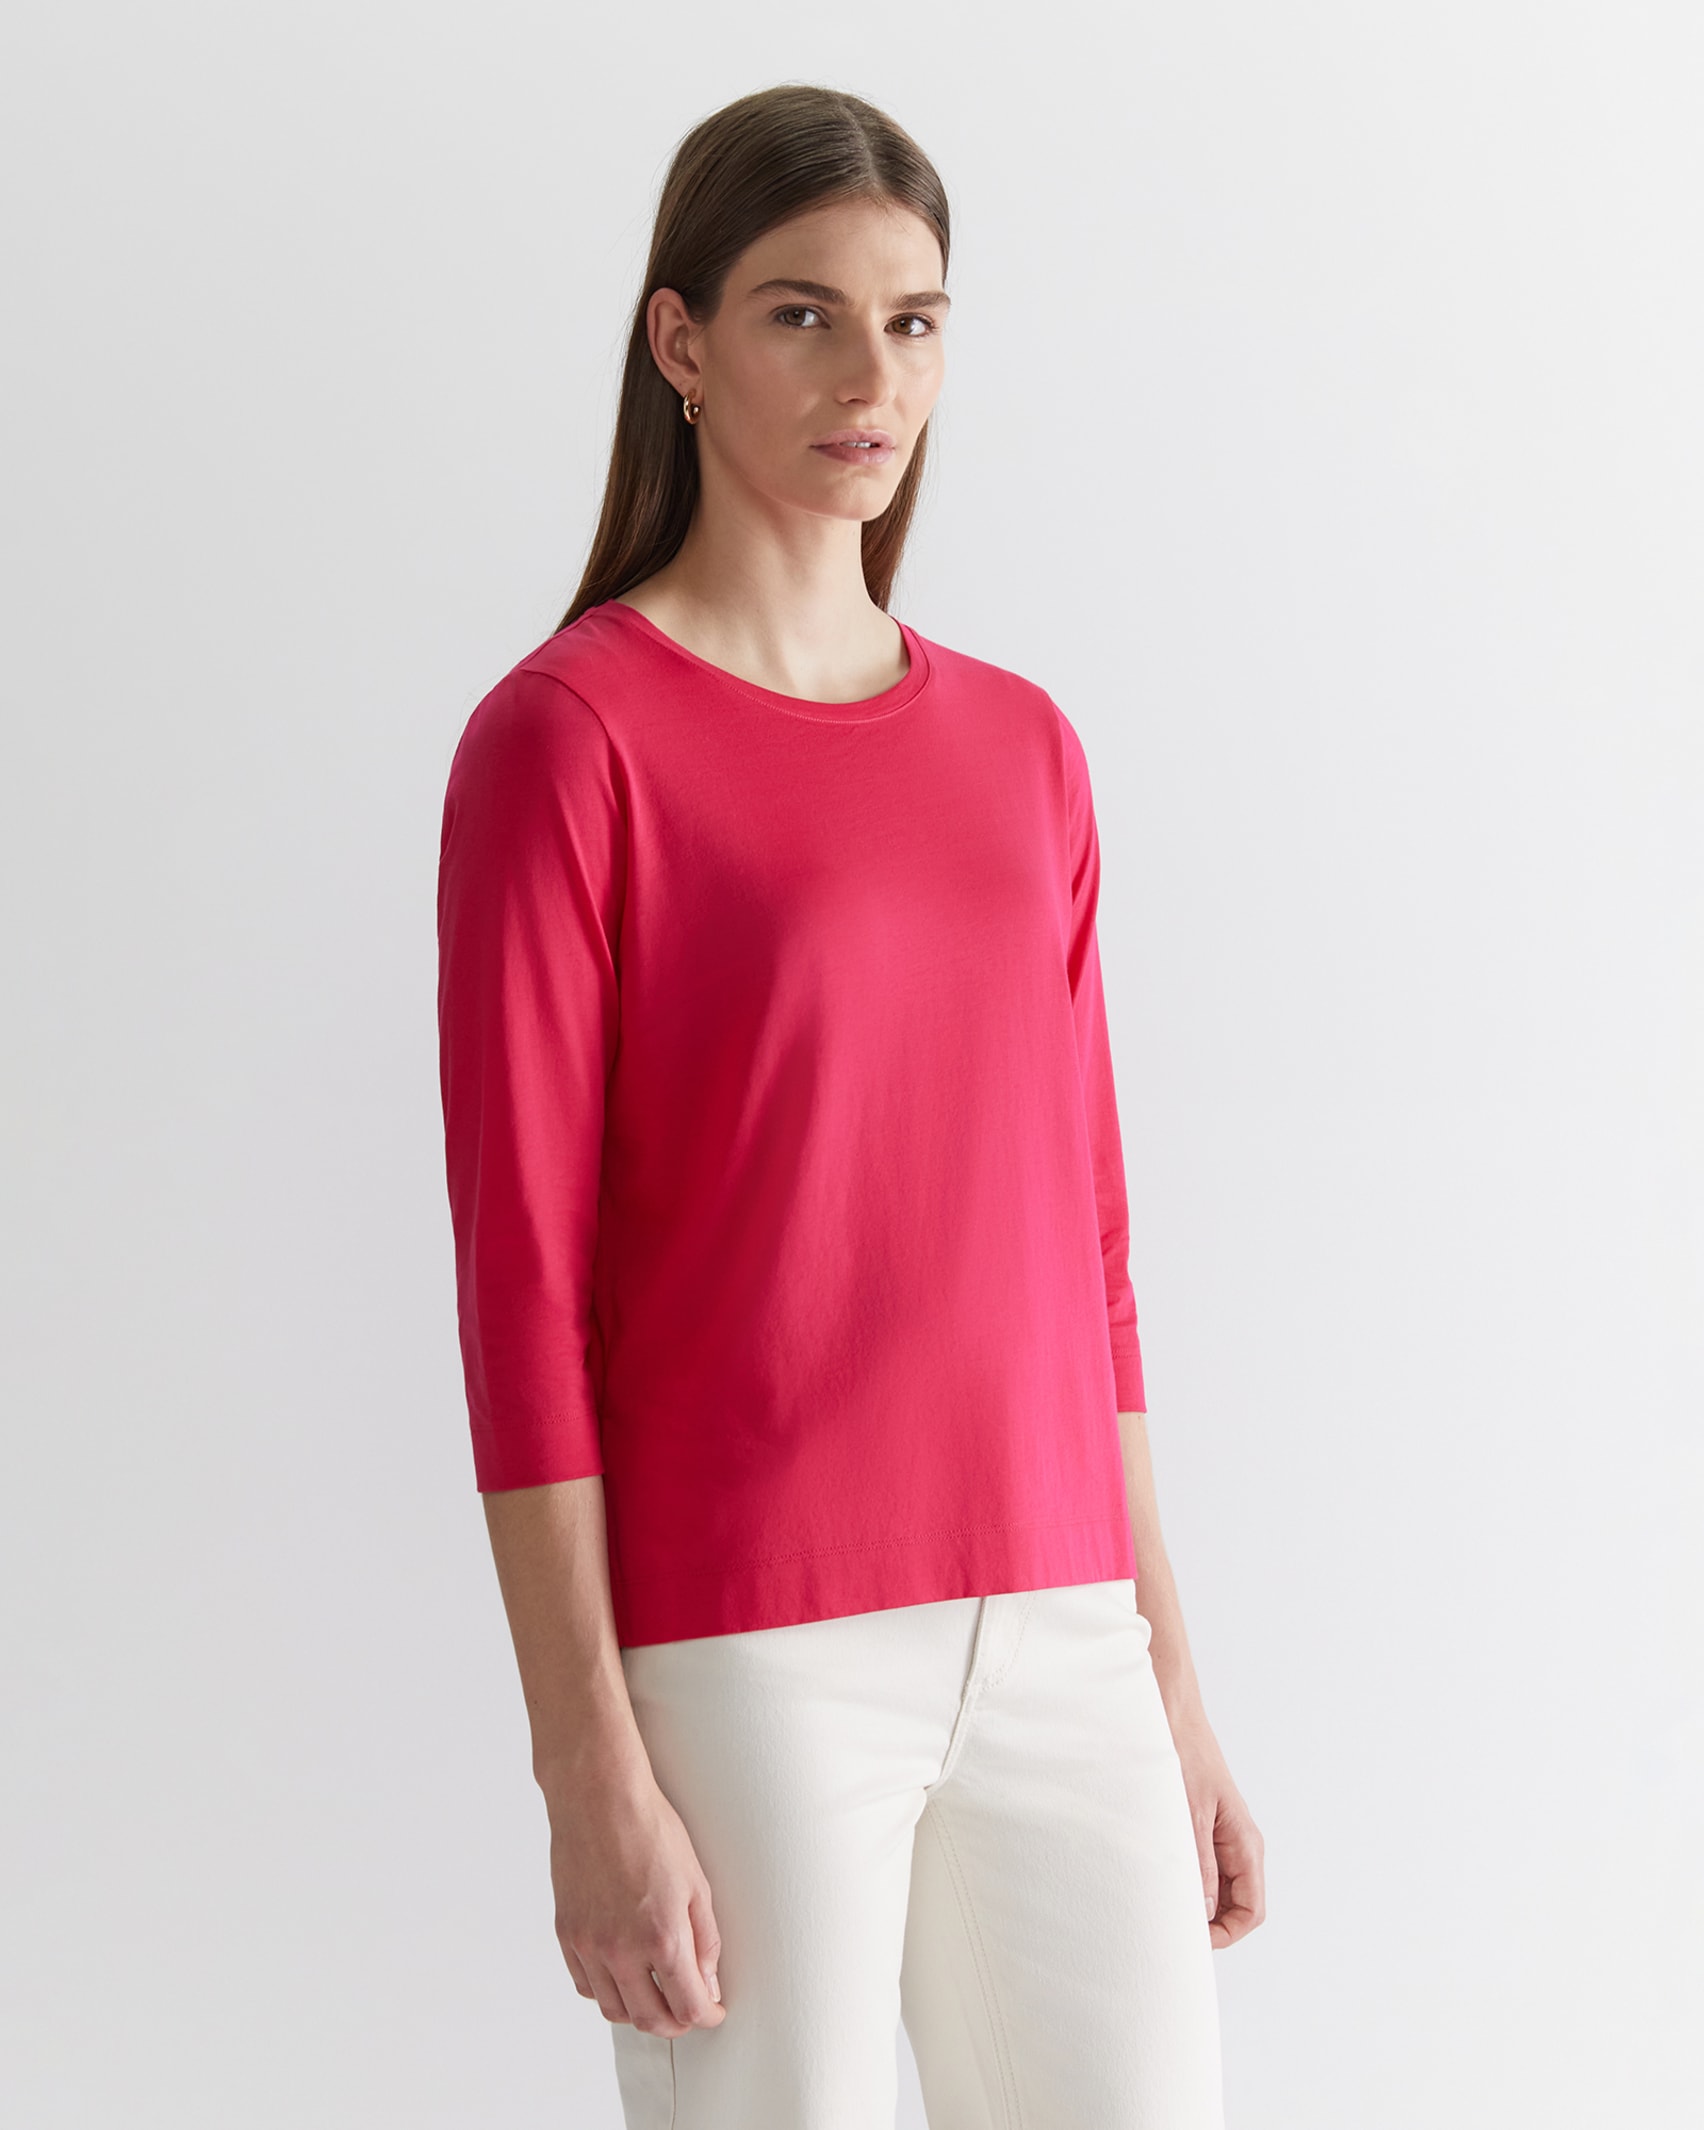 Cotton Crew 3/4 Sleeve T-Shirt in CERISE